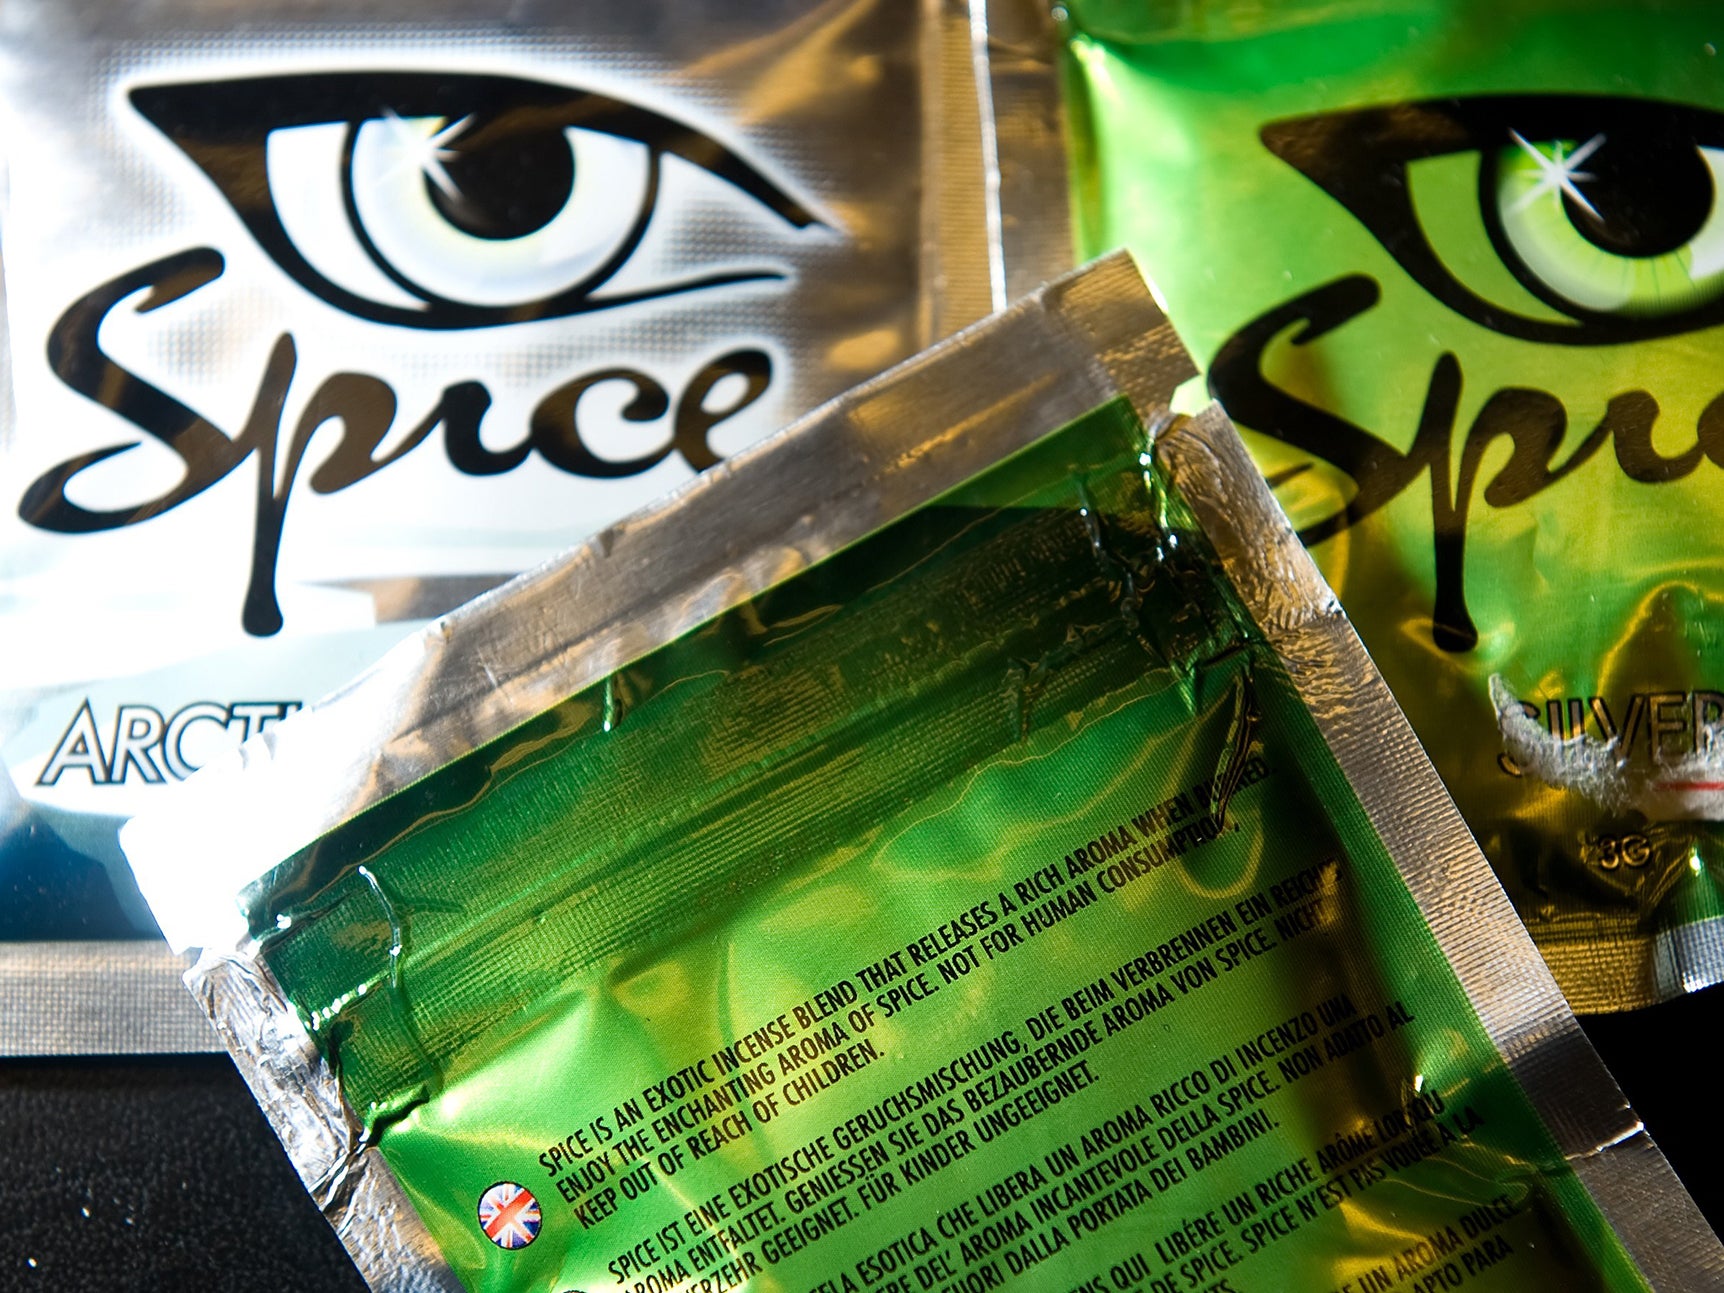 Drug markets changing rapidly because of influx of new synthetic substances like spice